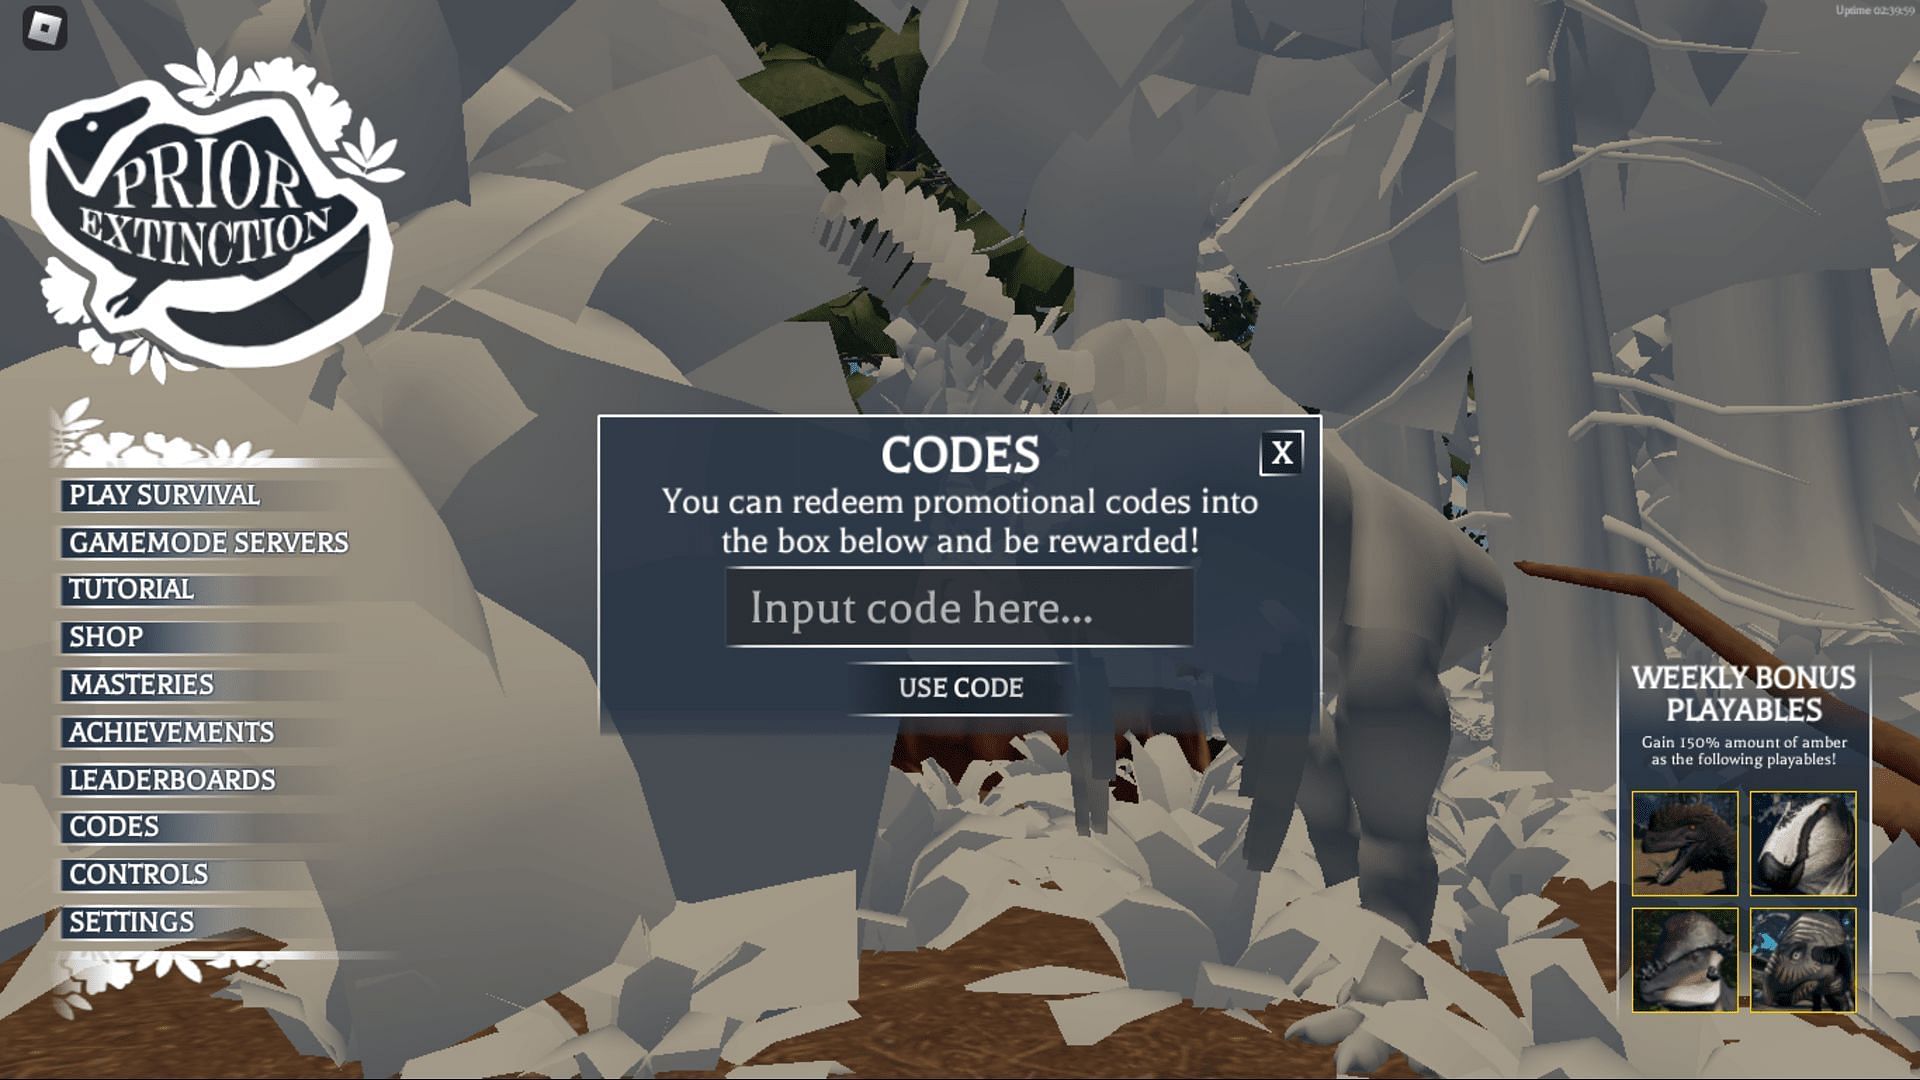 Redeem codes in Prior Extinction with ease (Image via Roblox)